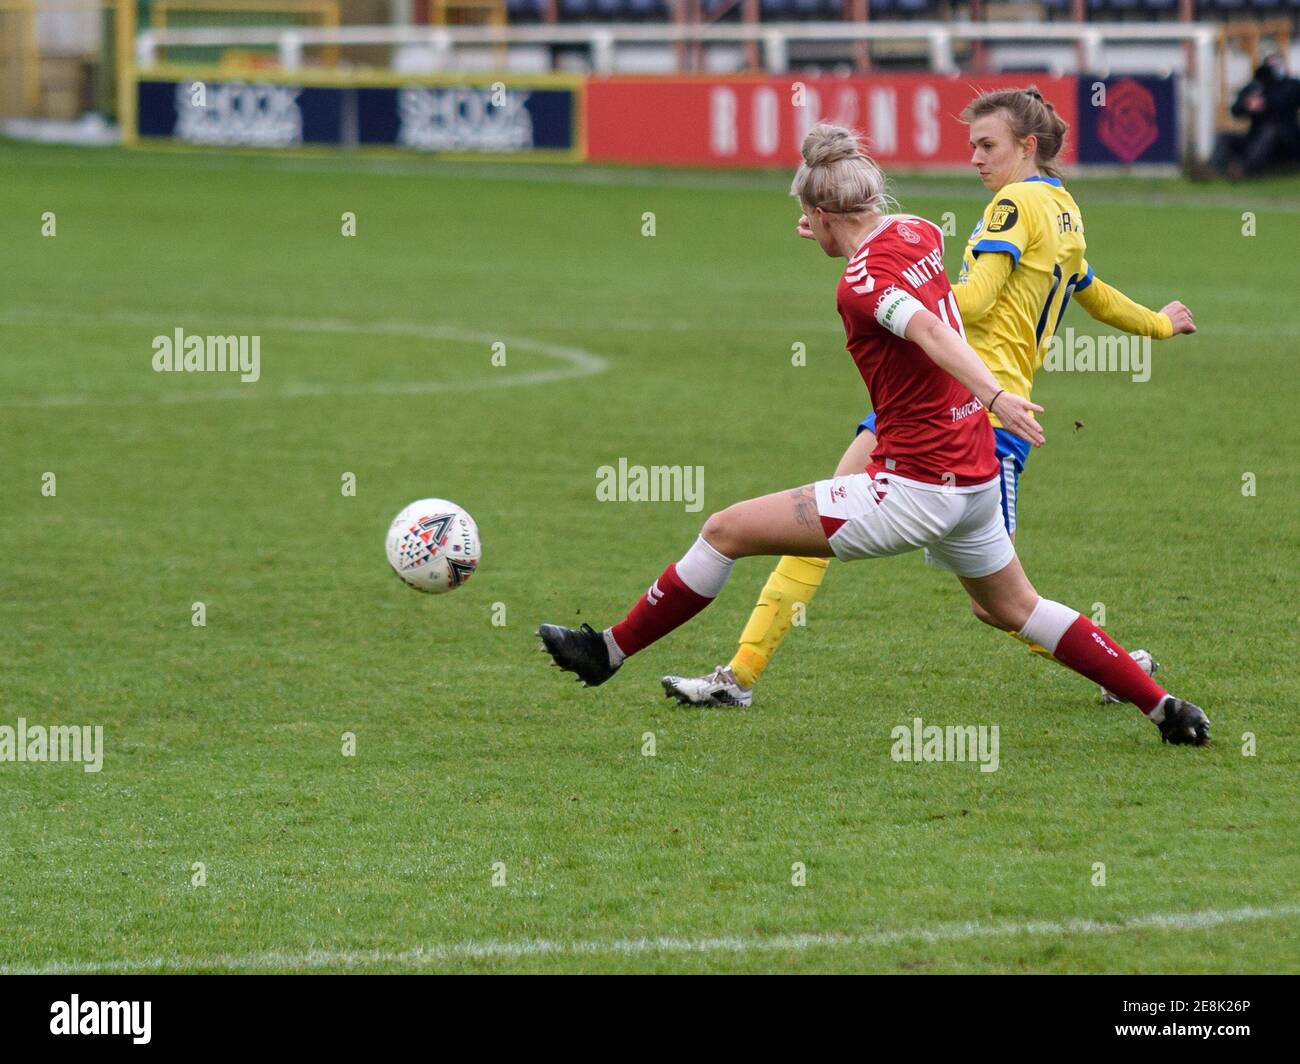 Bath, UK. 27th July, 2014. Jasmine Matthews (C) (#4 Bristol City)in a duel for the ball with Ellie Brazil (#16 Brighton & Hove Albion) Credit: SPP Sport Press Photo. /Alamy Live News Stock Photo